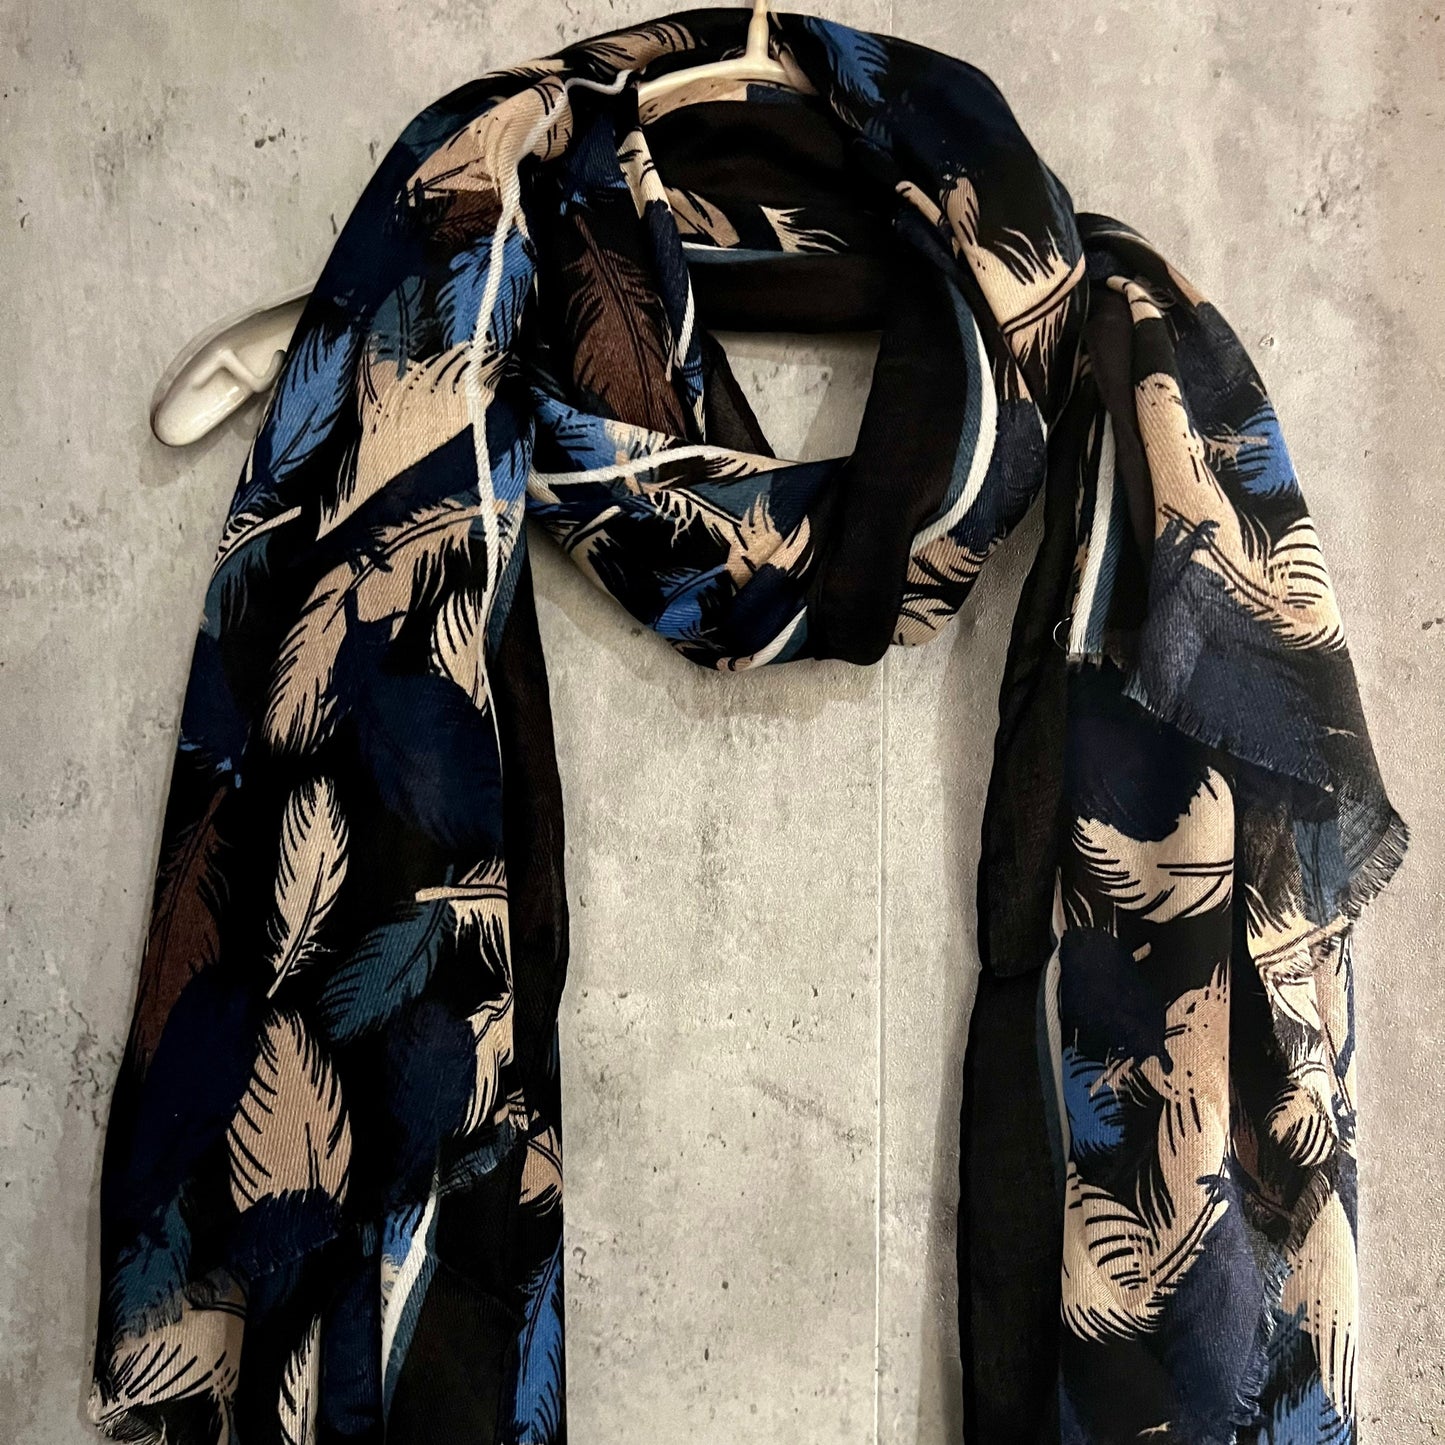 Black Cotton Scarf with Floating Blue Beige Feathers – A Stylish and Versatile Gift for Her